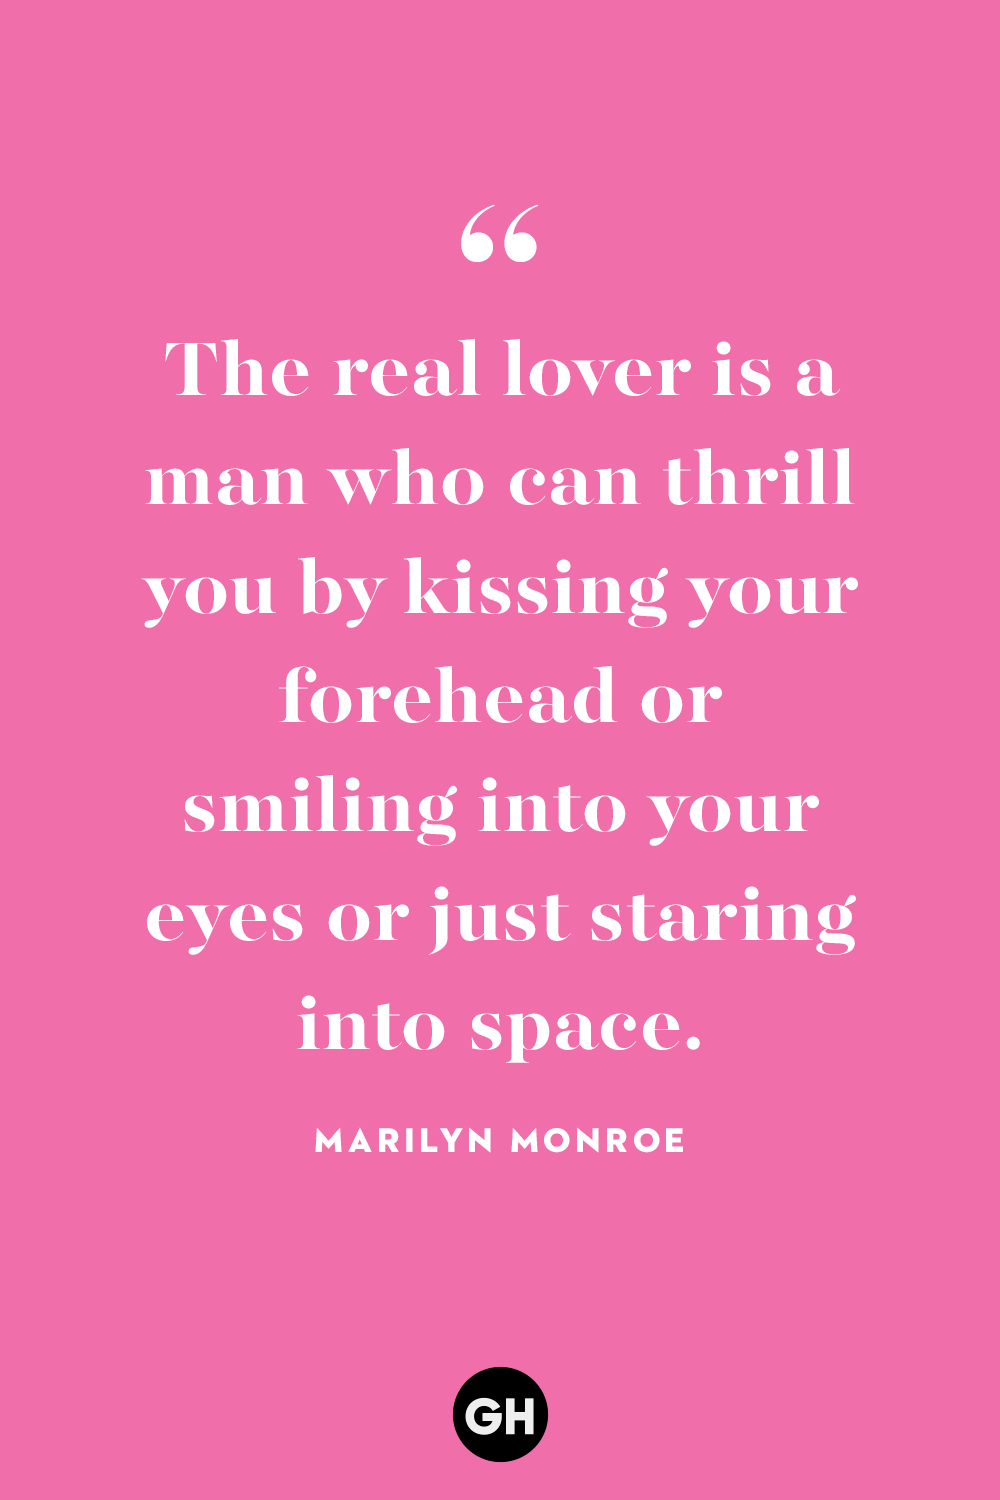 smiling love quotes